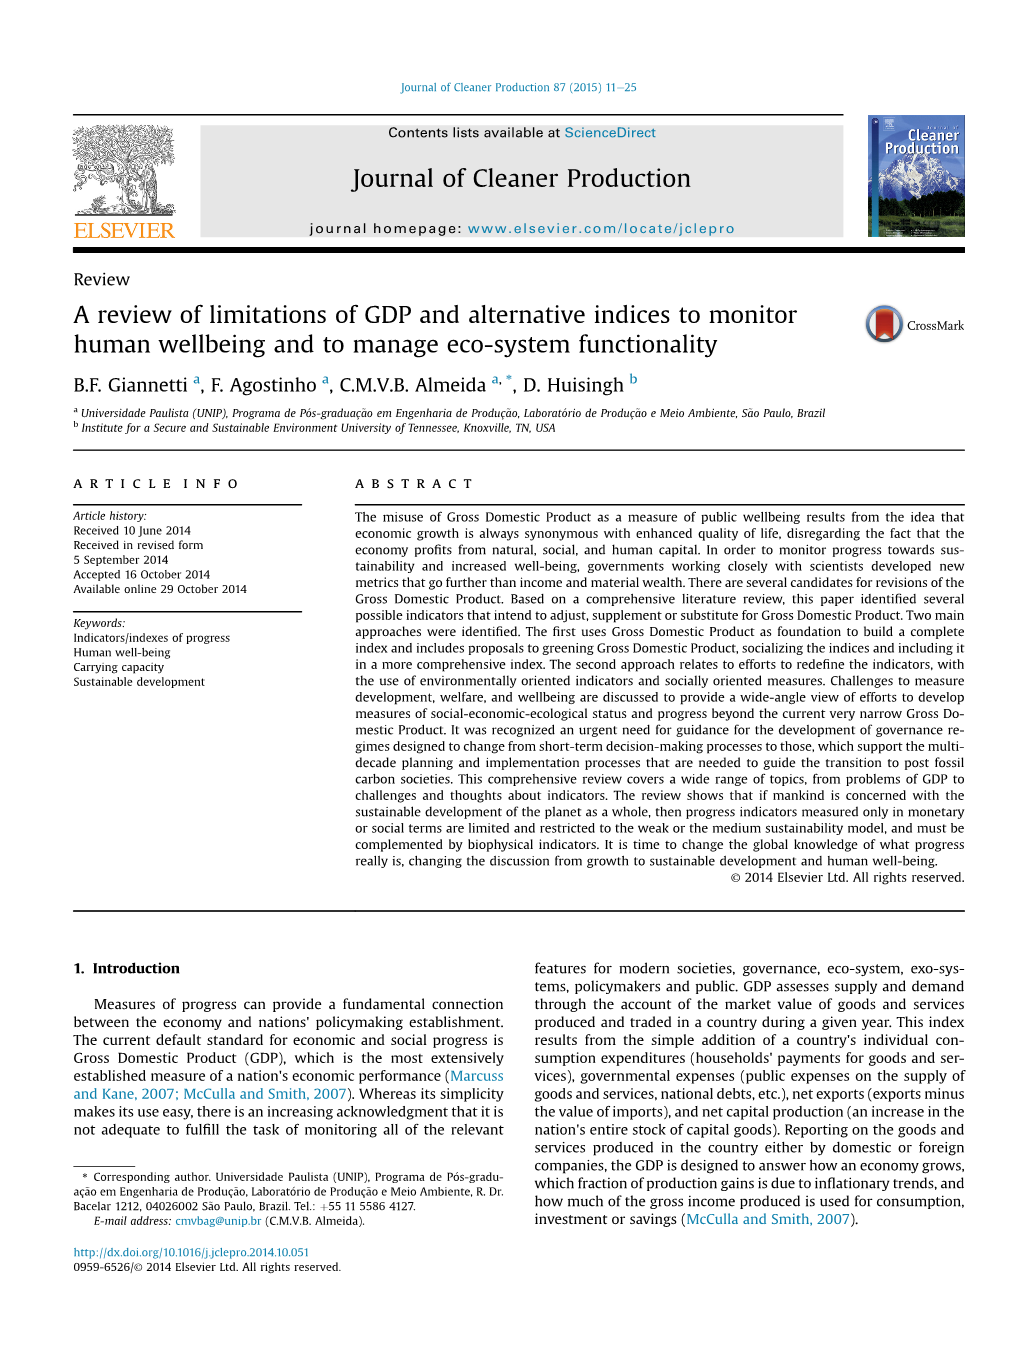 A Review of Limitations of GDP and Alternative Indices to Monitor Human Wellbeing and to Manage Eco-System Functionality